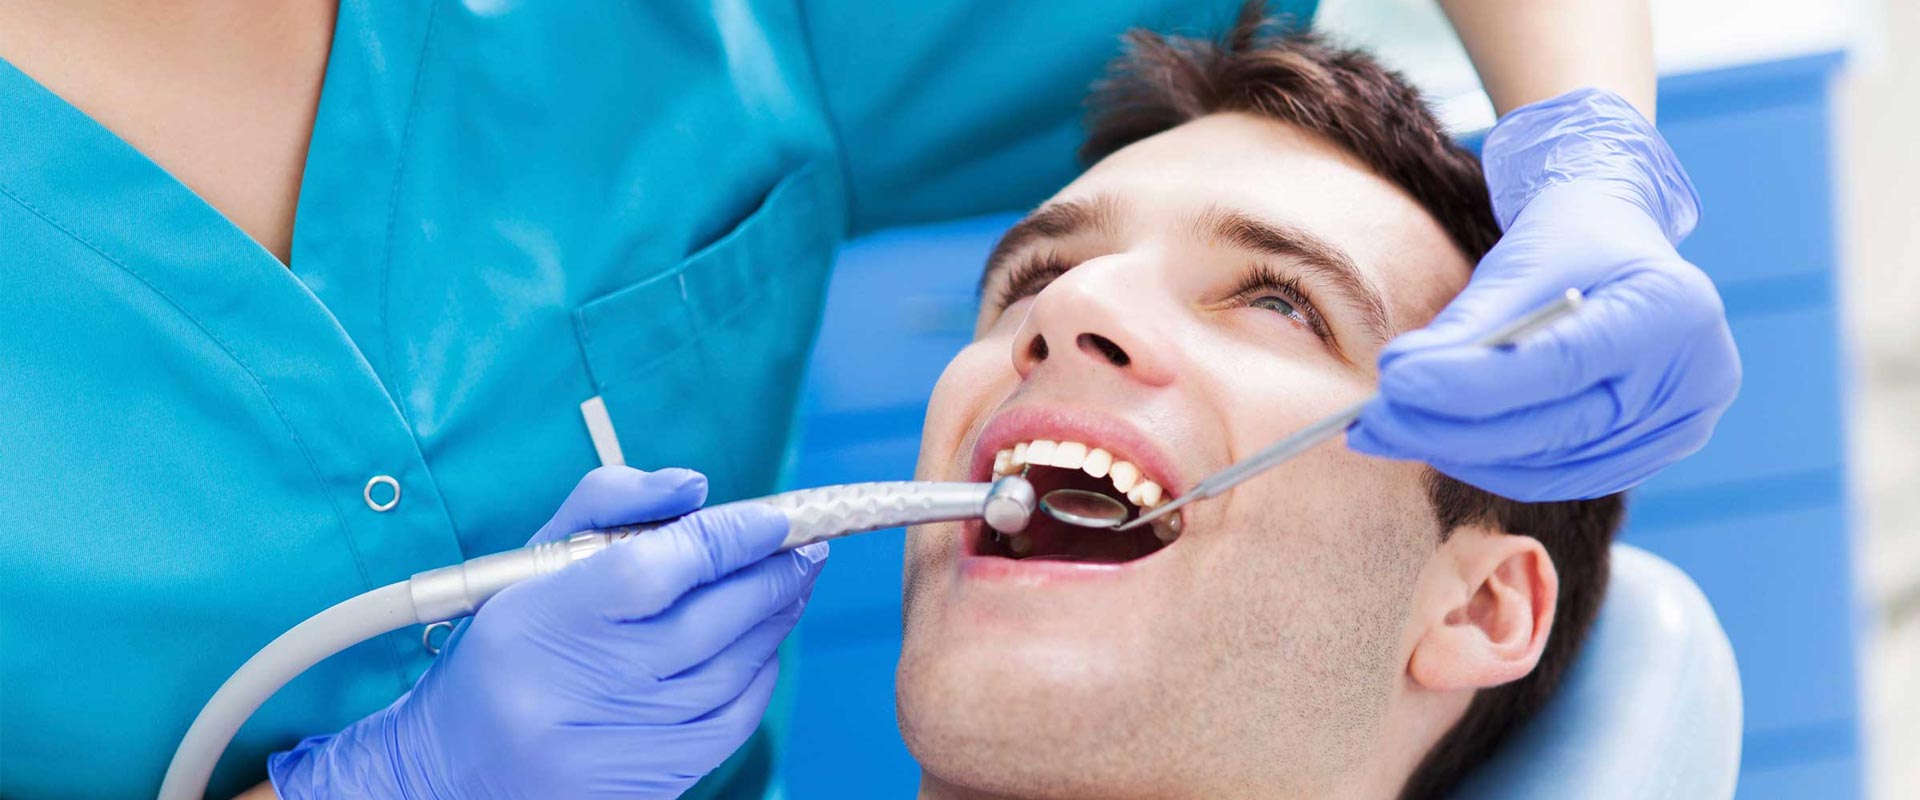 Through South Edmonton dentist, you will learn about new opportunities.